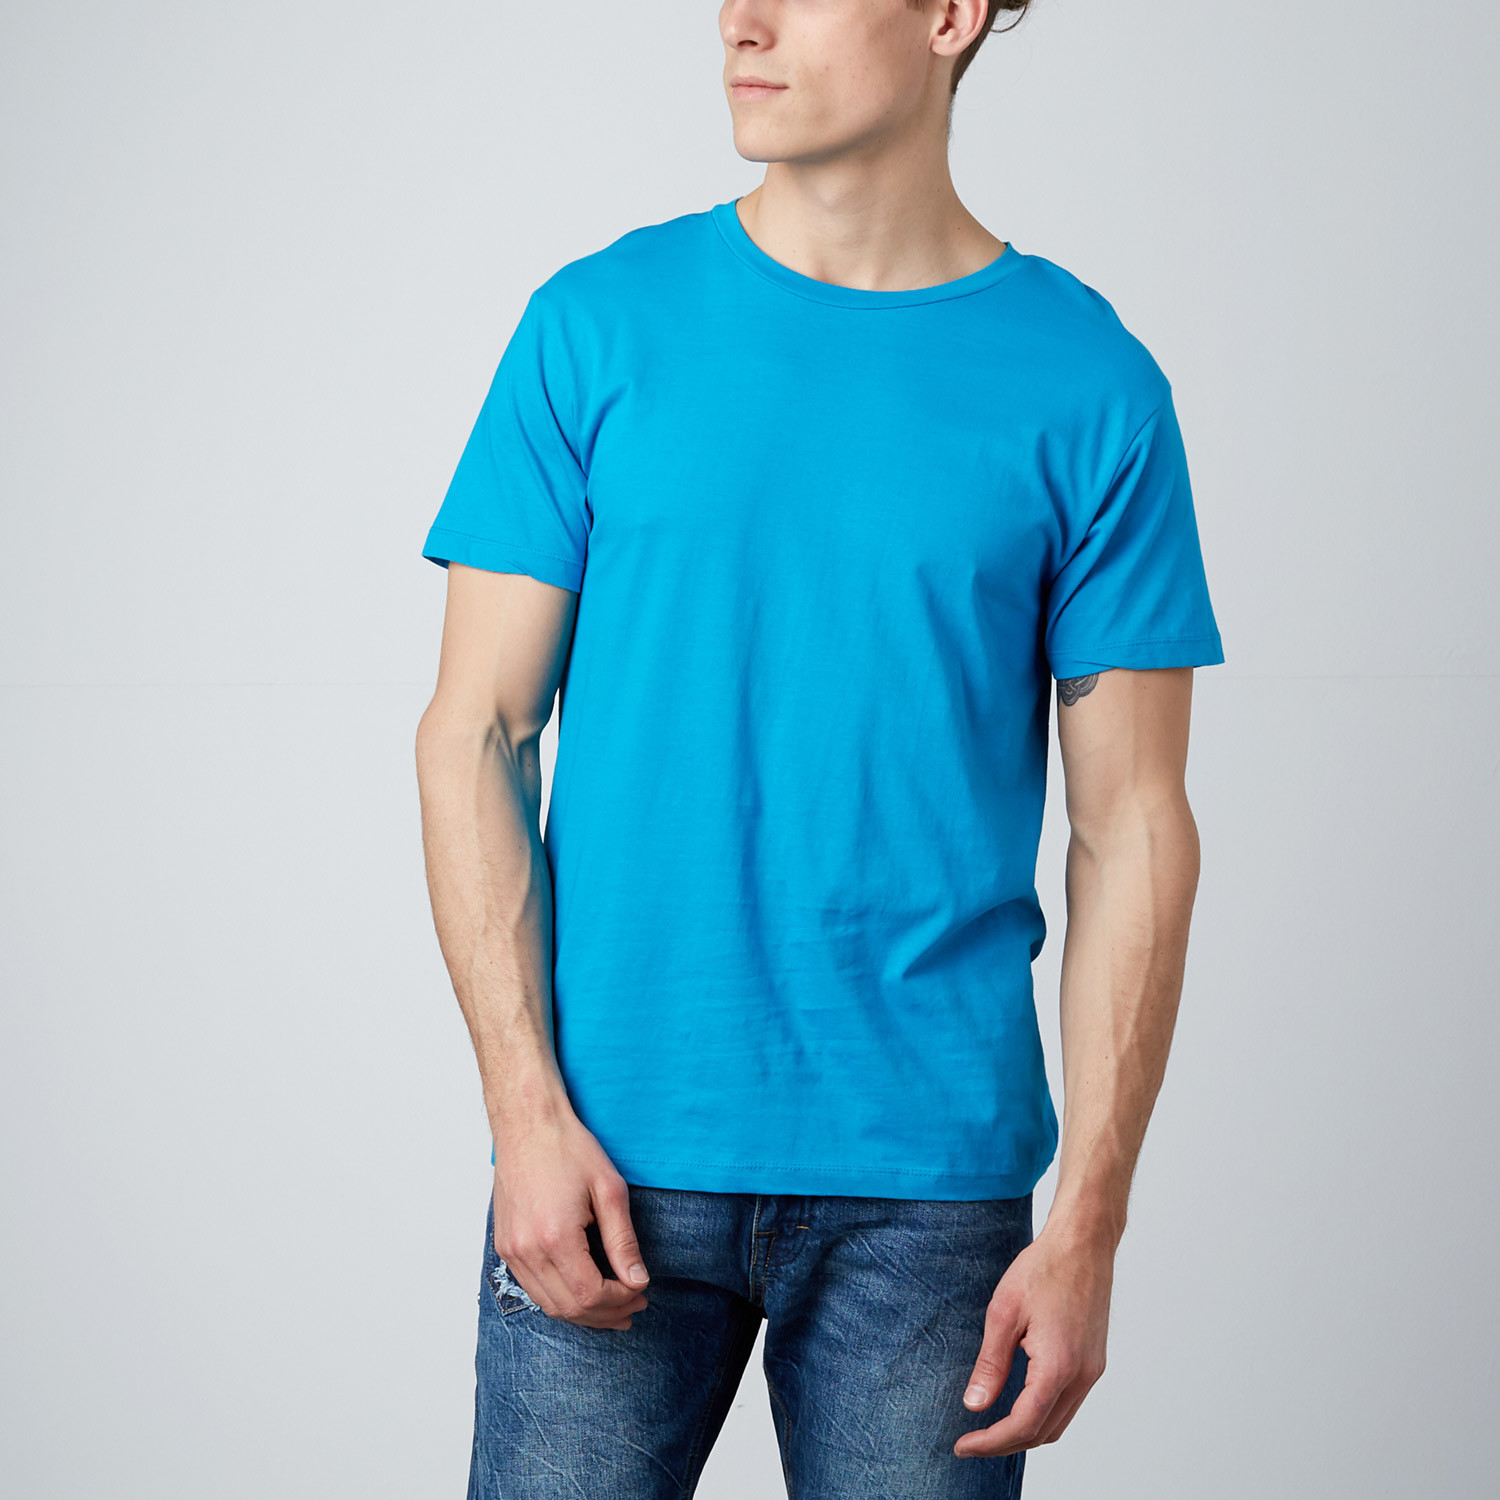  Combed  Cotton  Tee Turquoise S J Taverniti Touch 